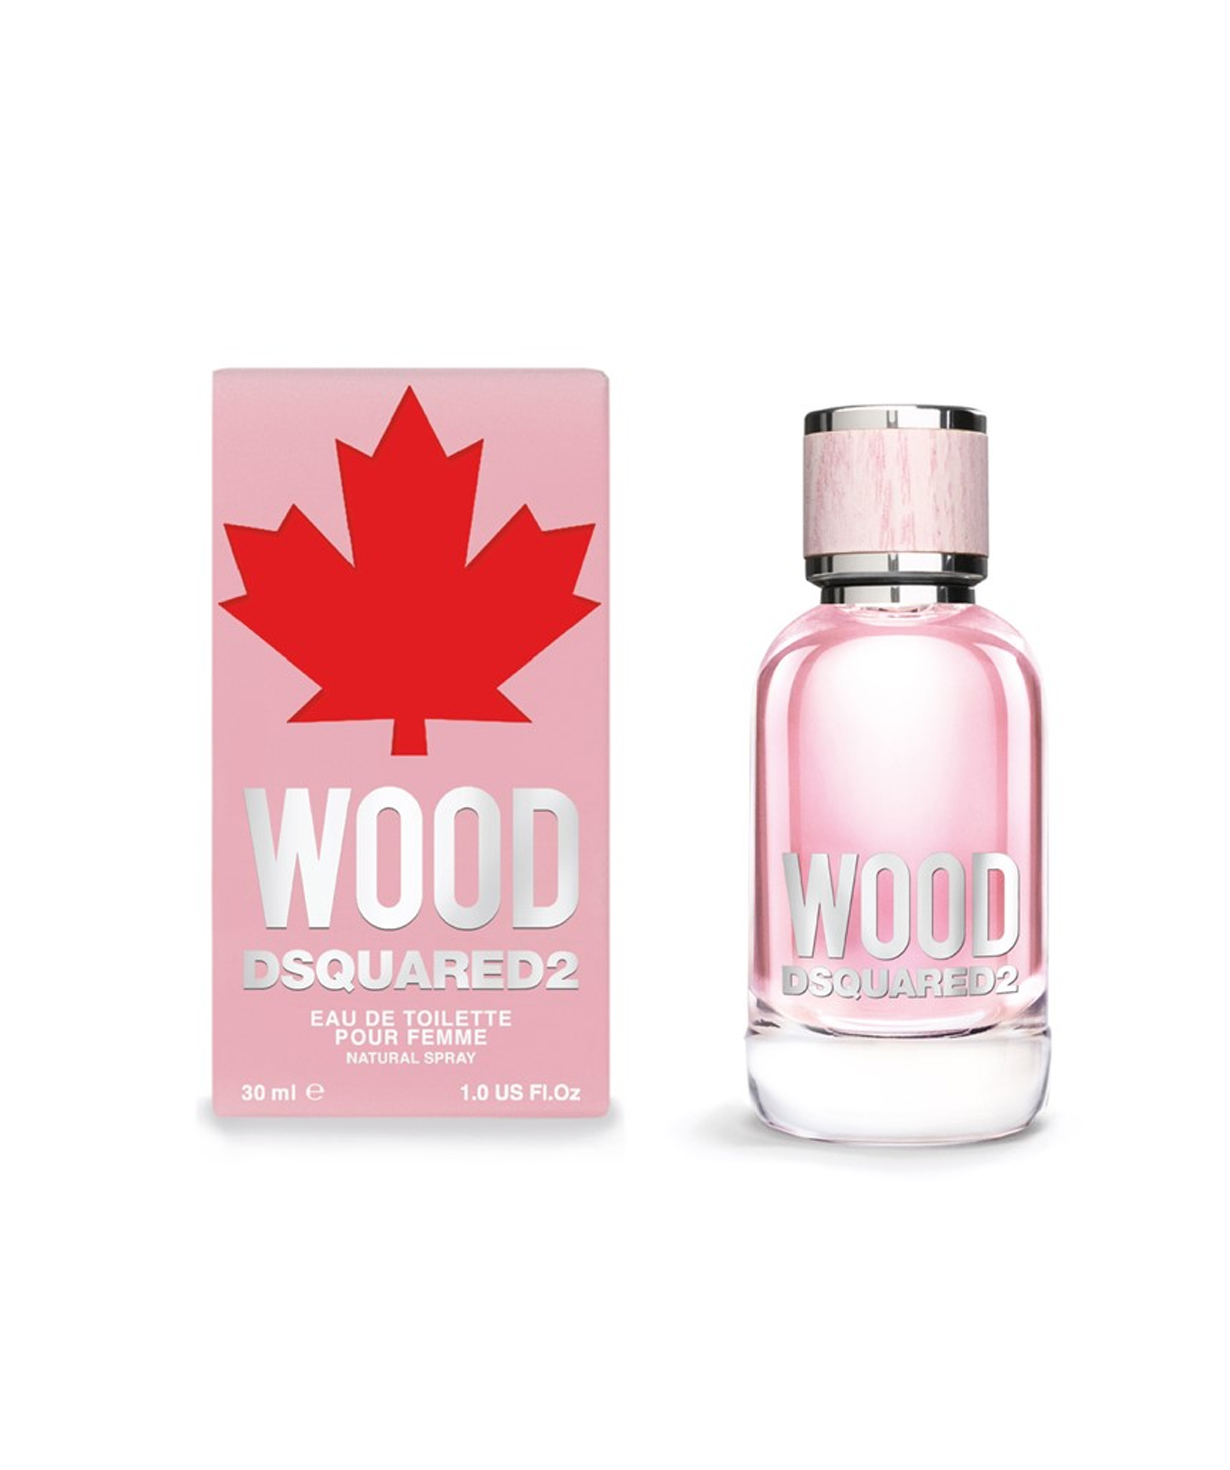 Perfume «Dsquared2» Wood, for women, 30 ml